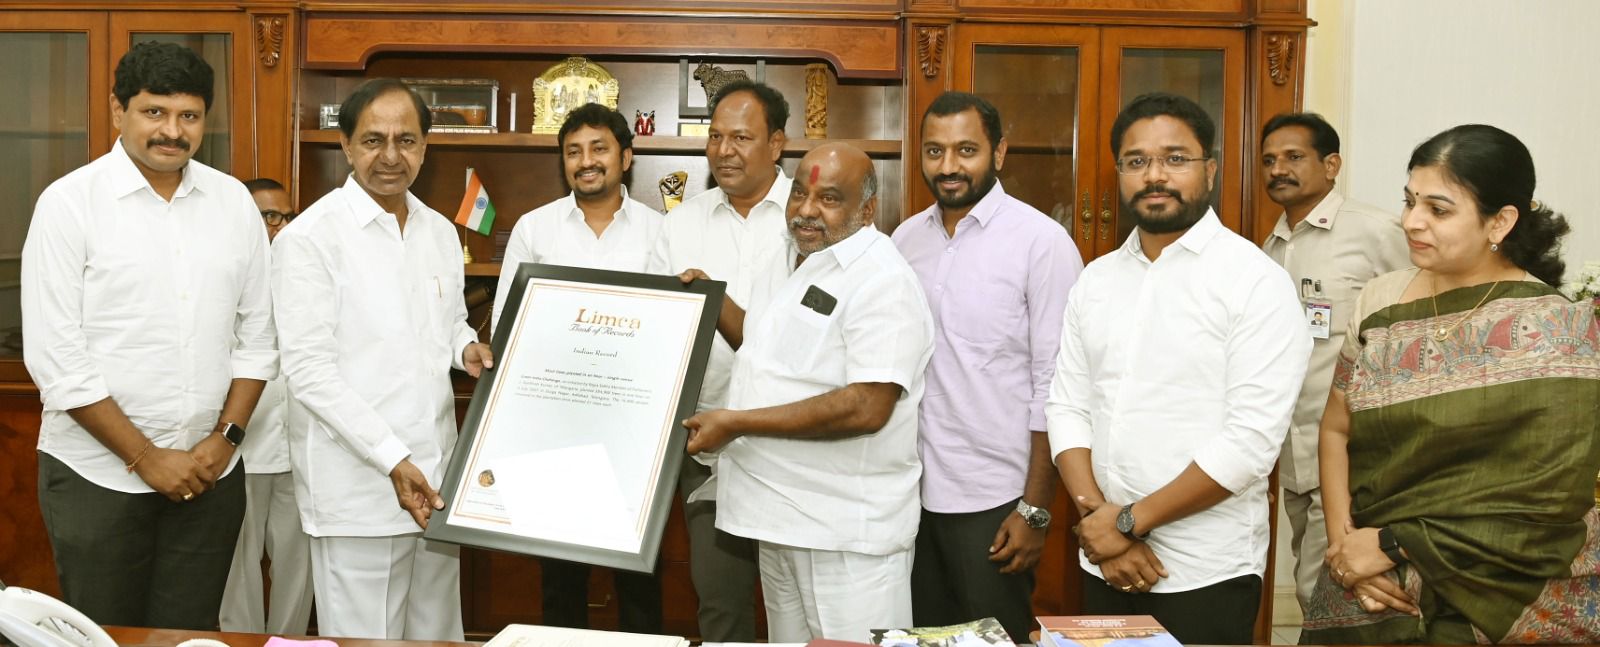 Limca Book of Records